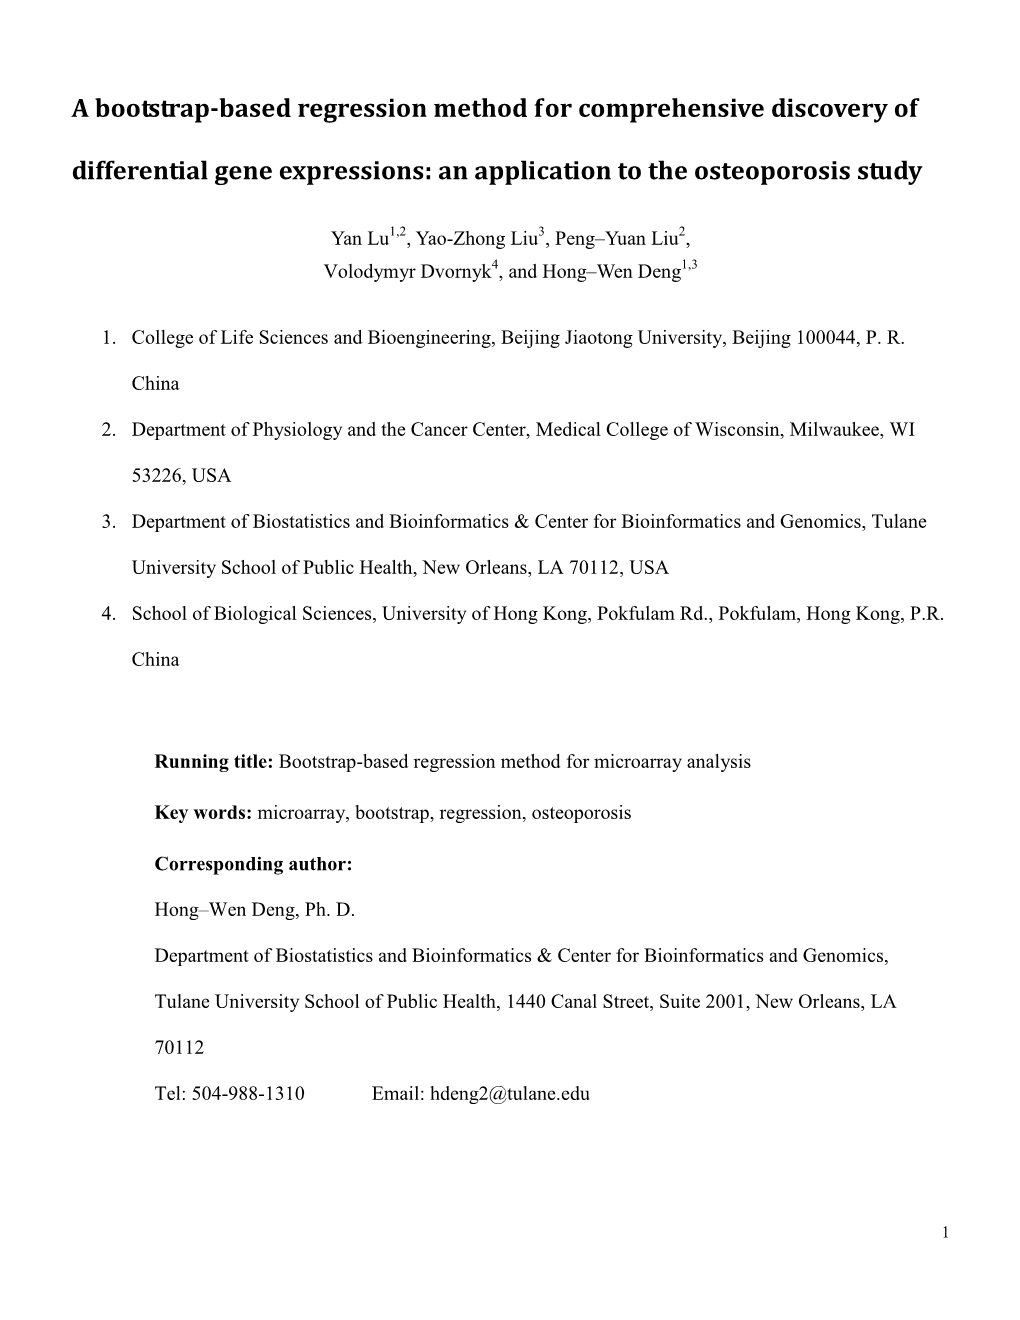 A Bootstrap-Based Regression Method for Comprehensive Discovery of Differential Gene Expressions: an Application to the Osteoporosis Study